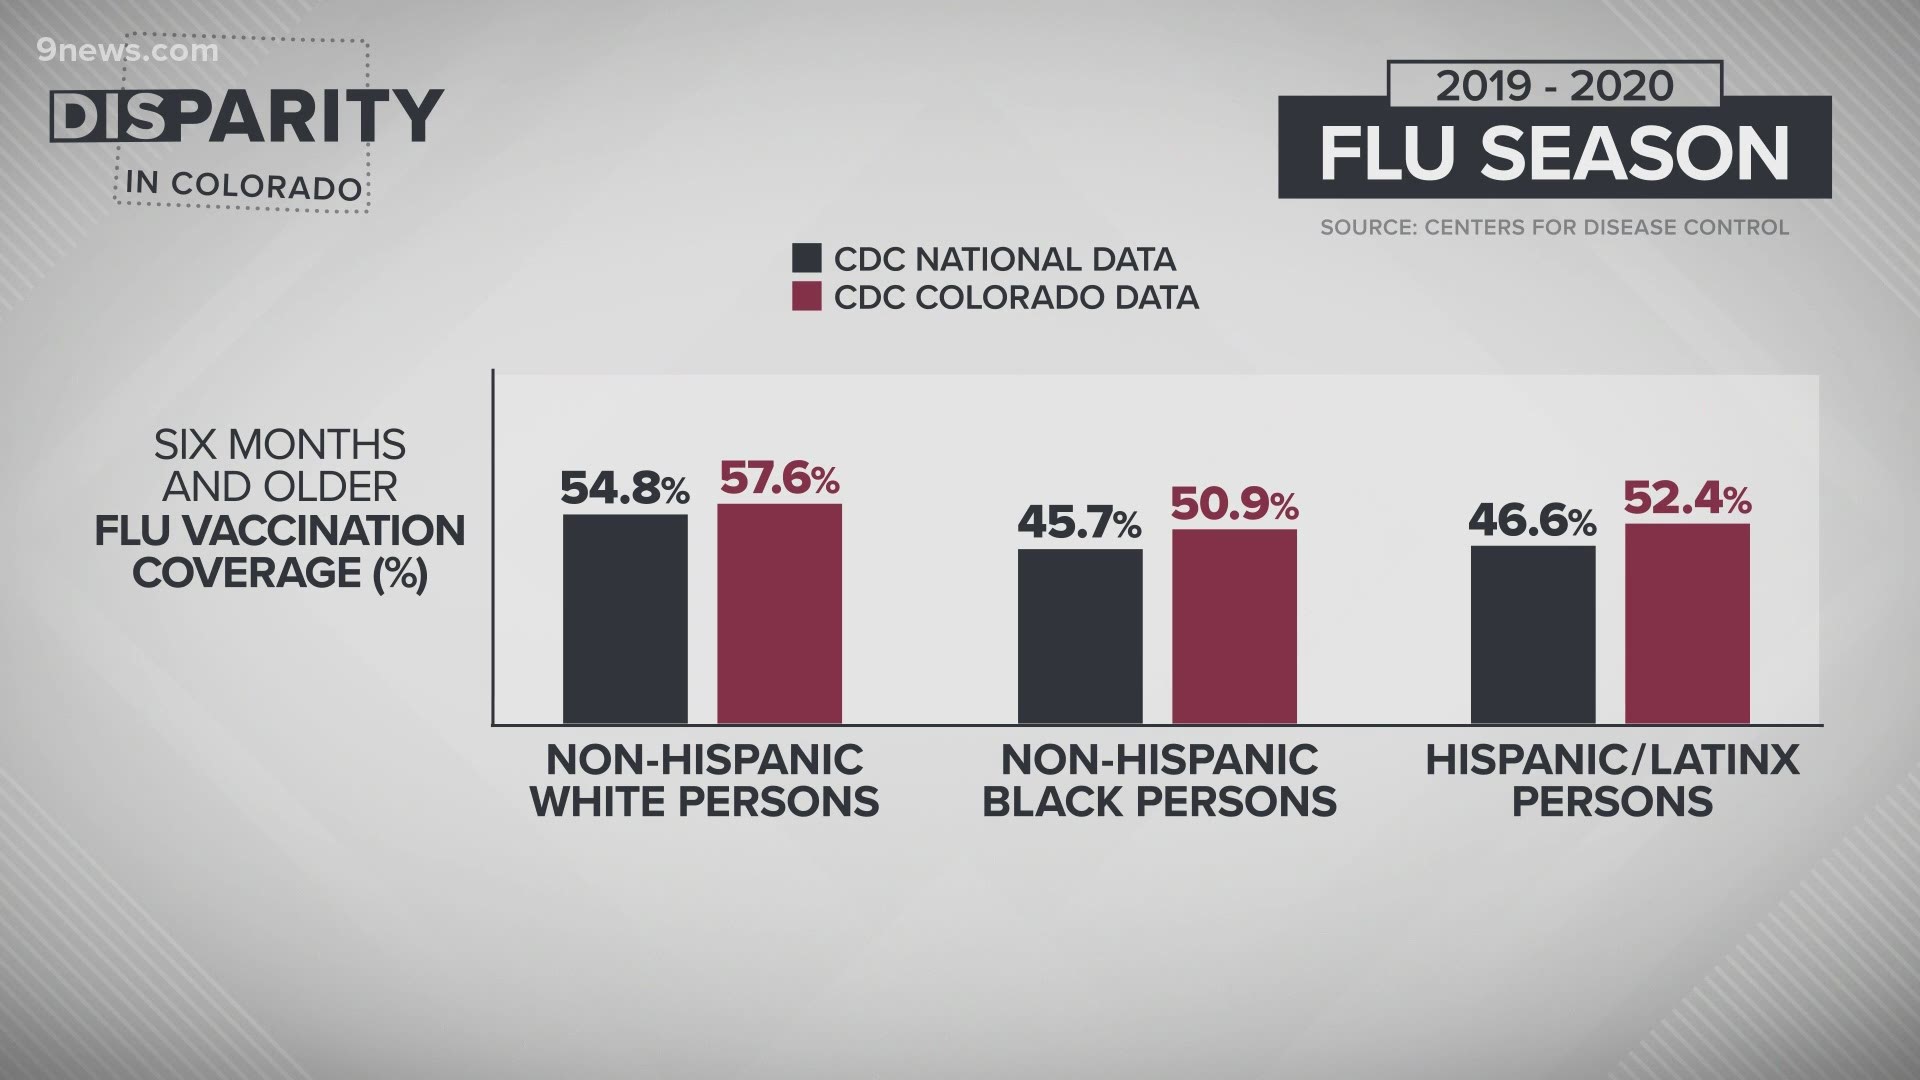 “Our system is creating exactly what it was designed to do,” Deidre Johnson said of lagging flu vaccination uptake rates in communities of color.